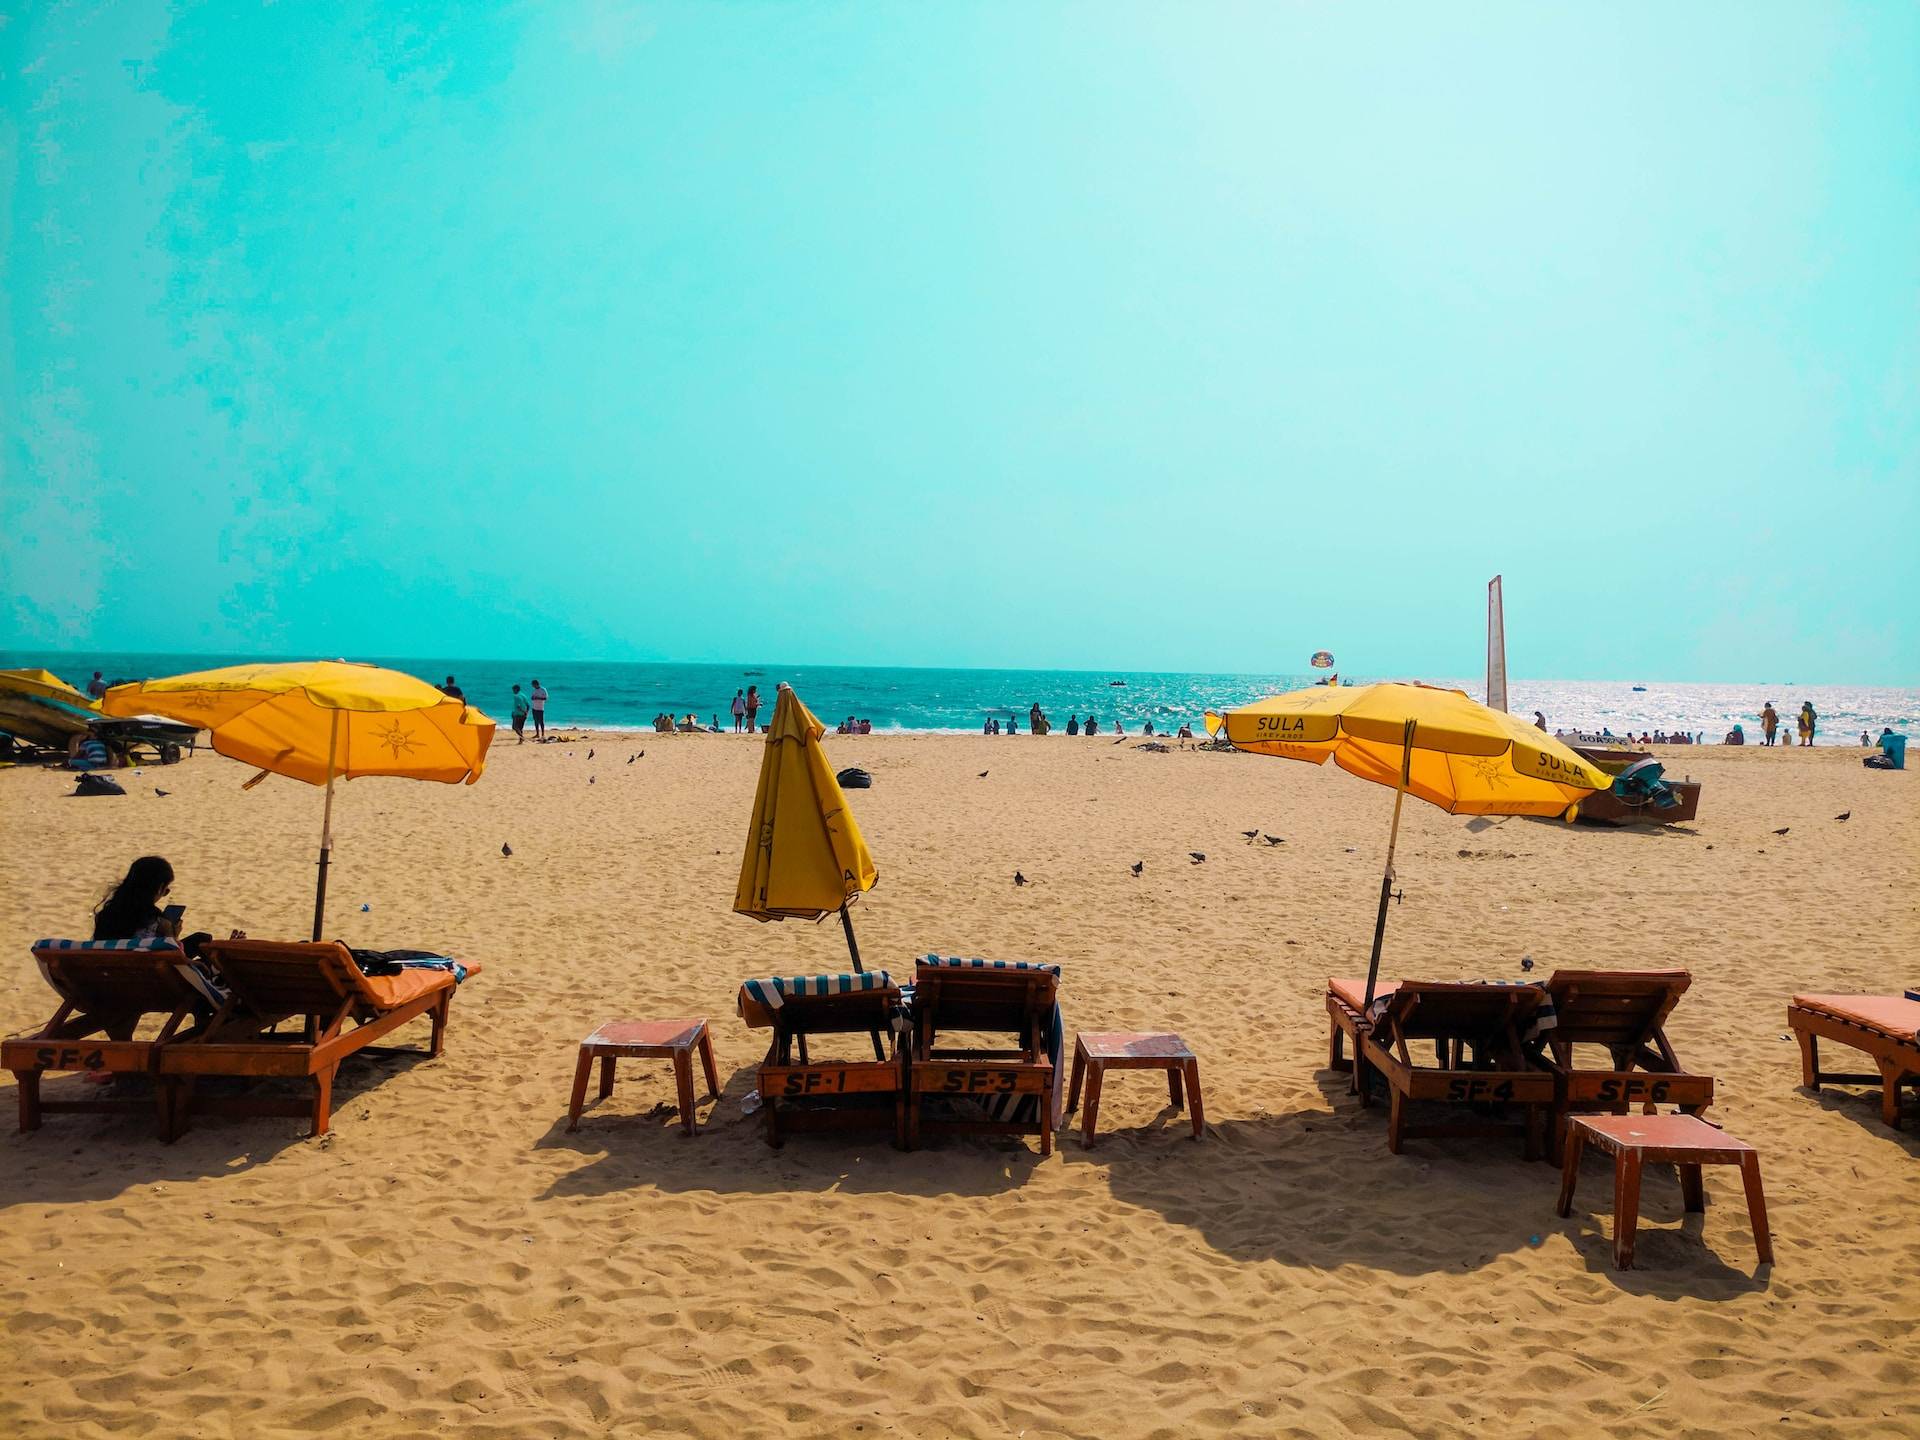 Glamorous Goa Tour Packages From Kerala!